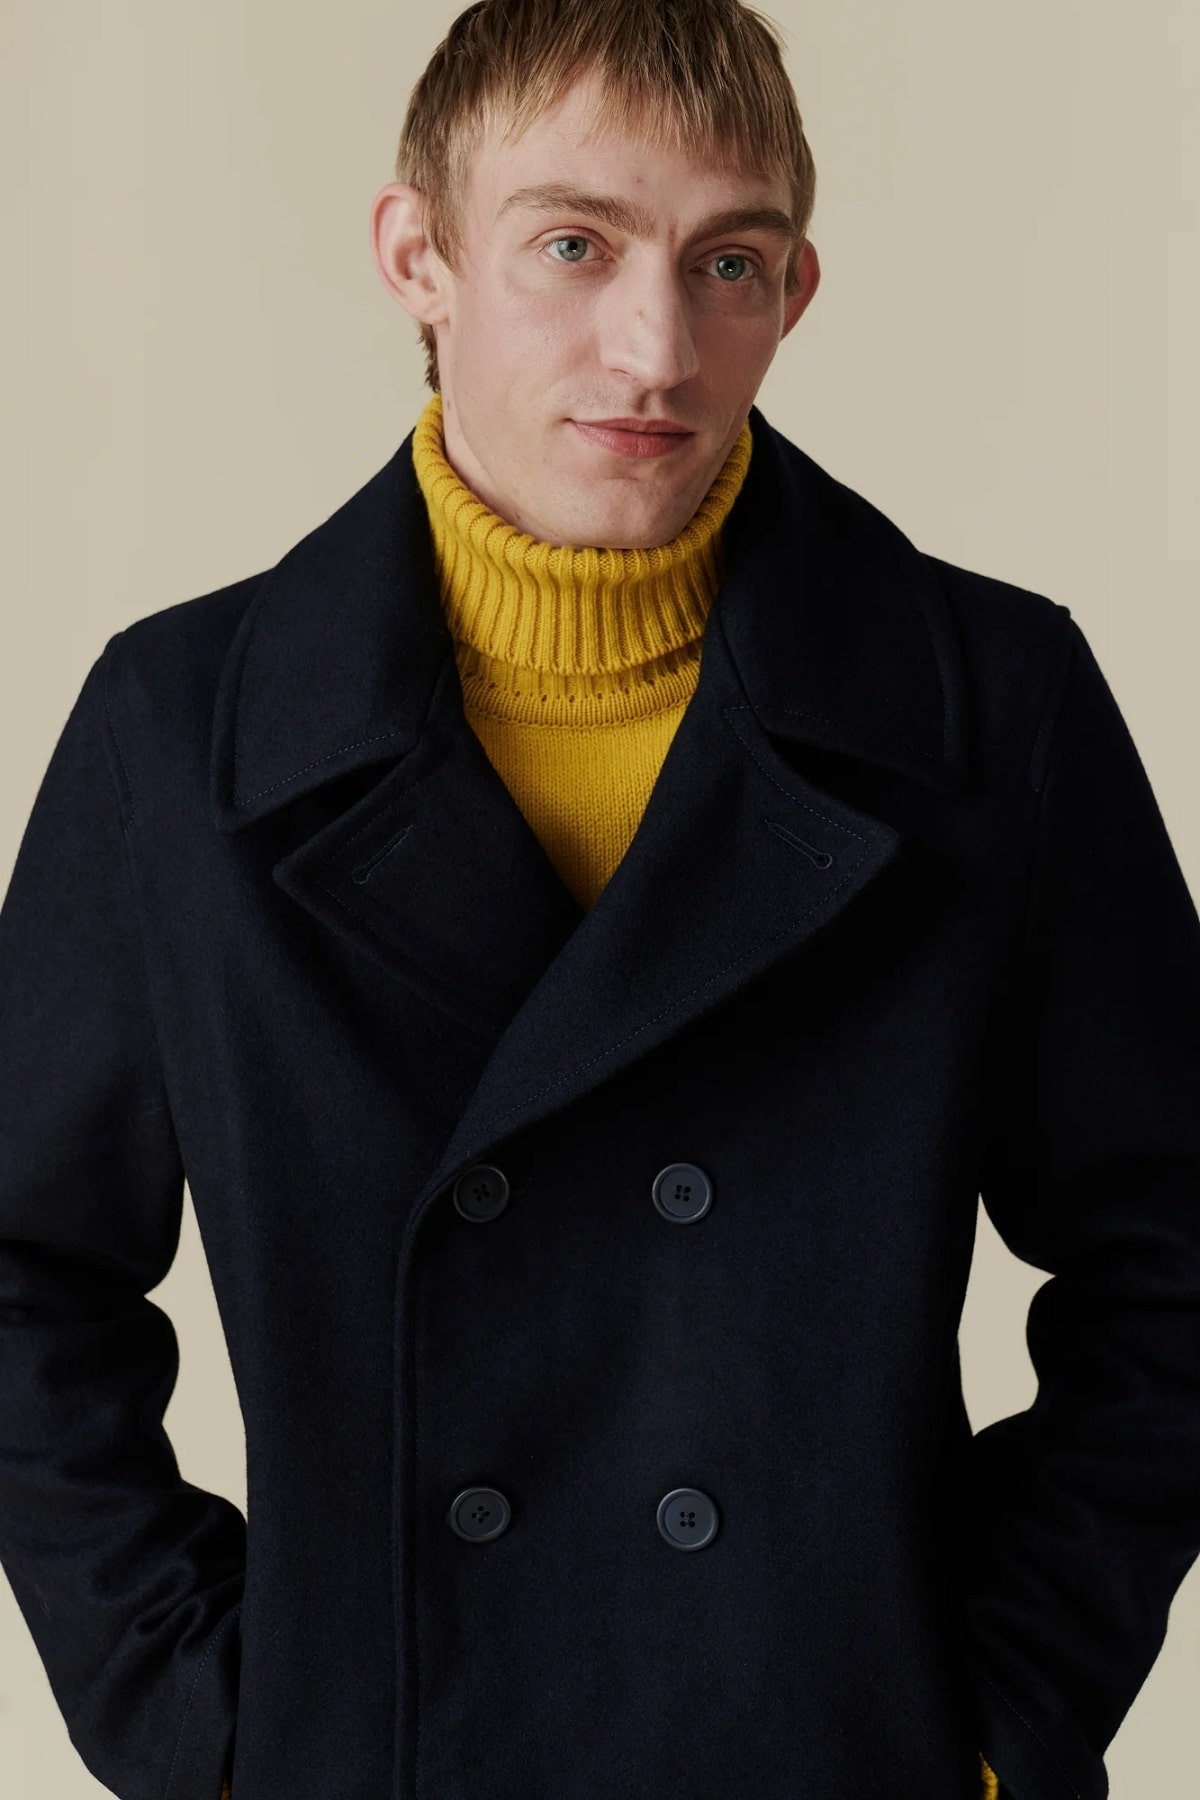 The Timeless Elegance of the Peacoat: A Classic Staple in Men's Fashion